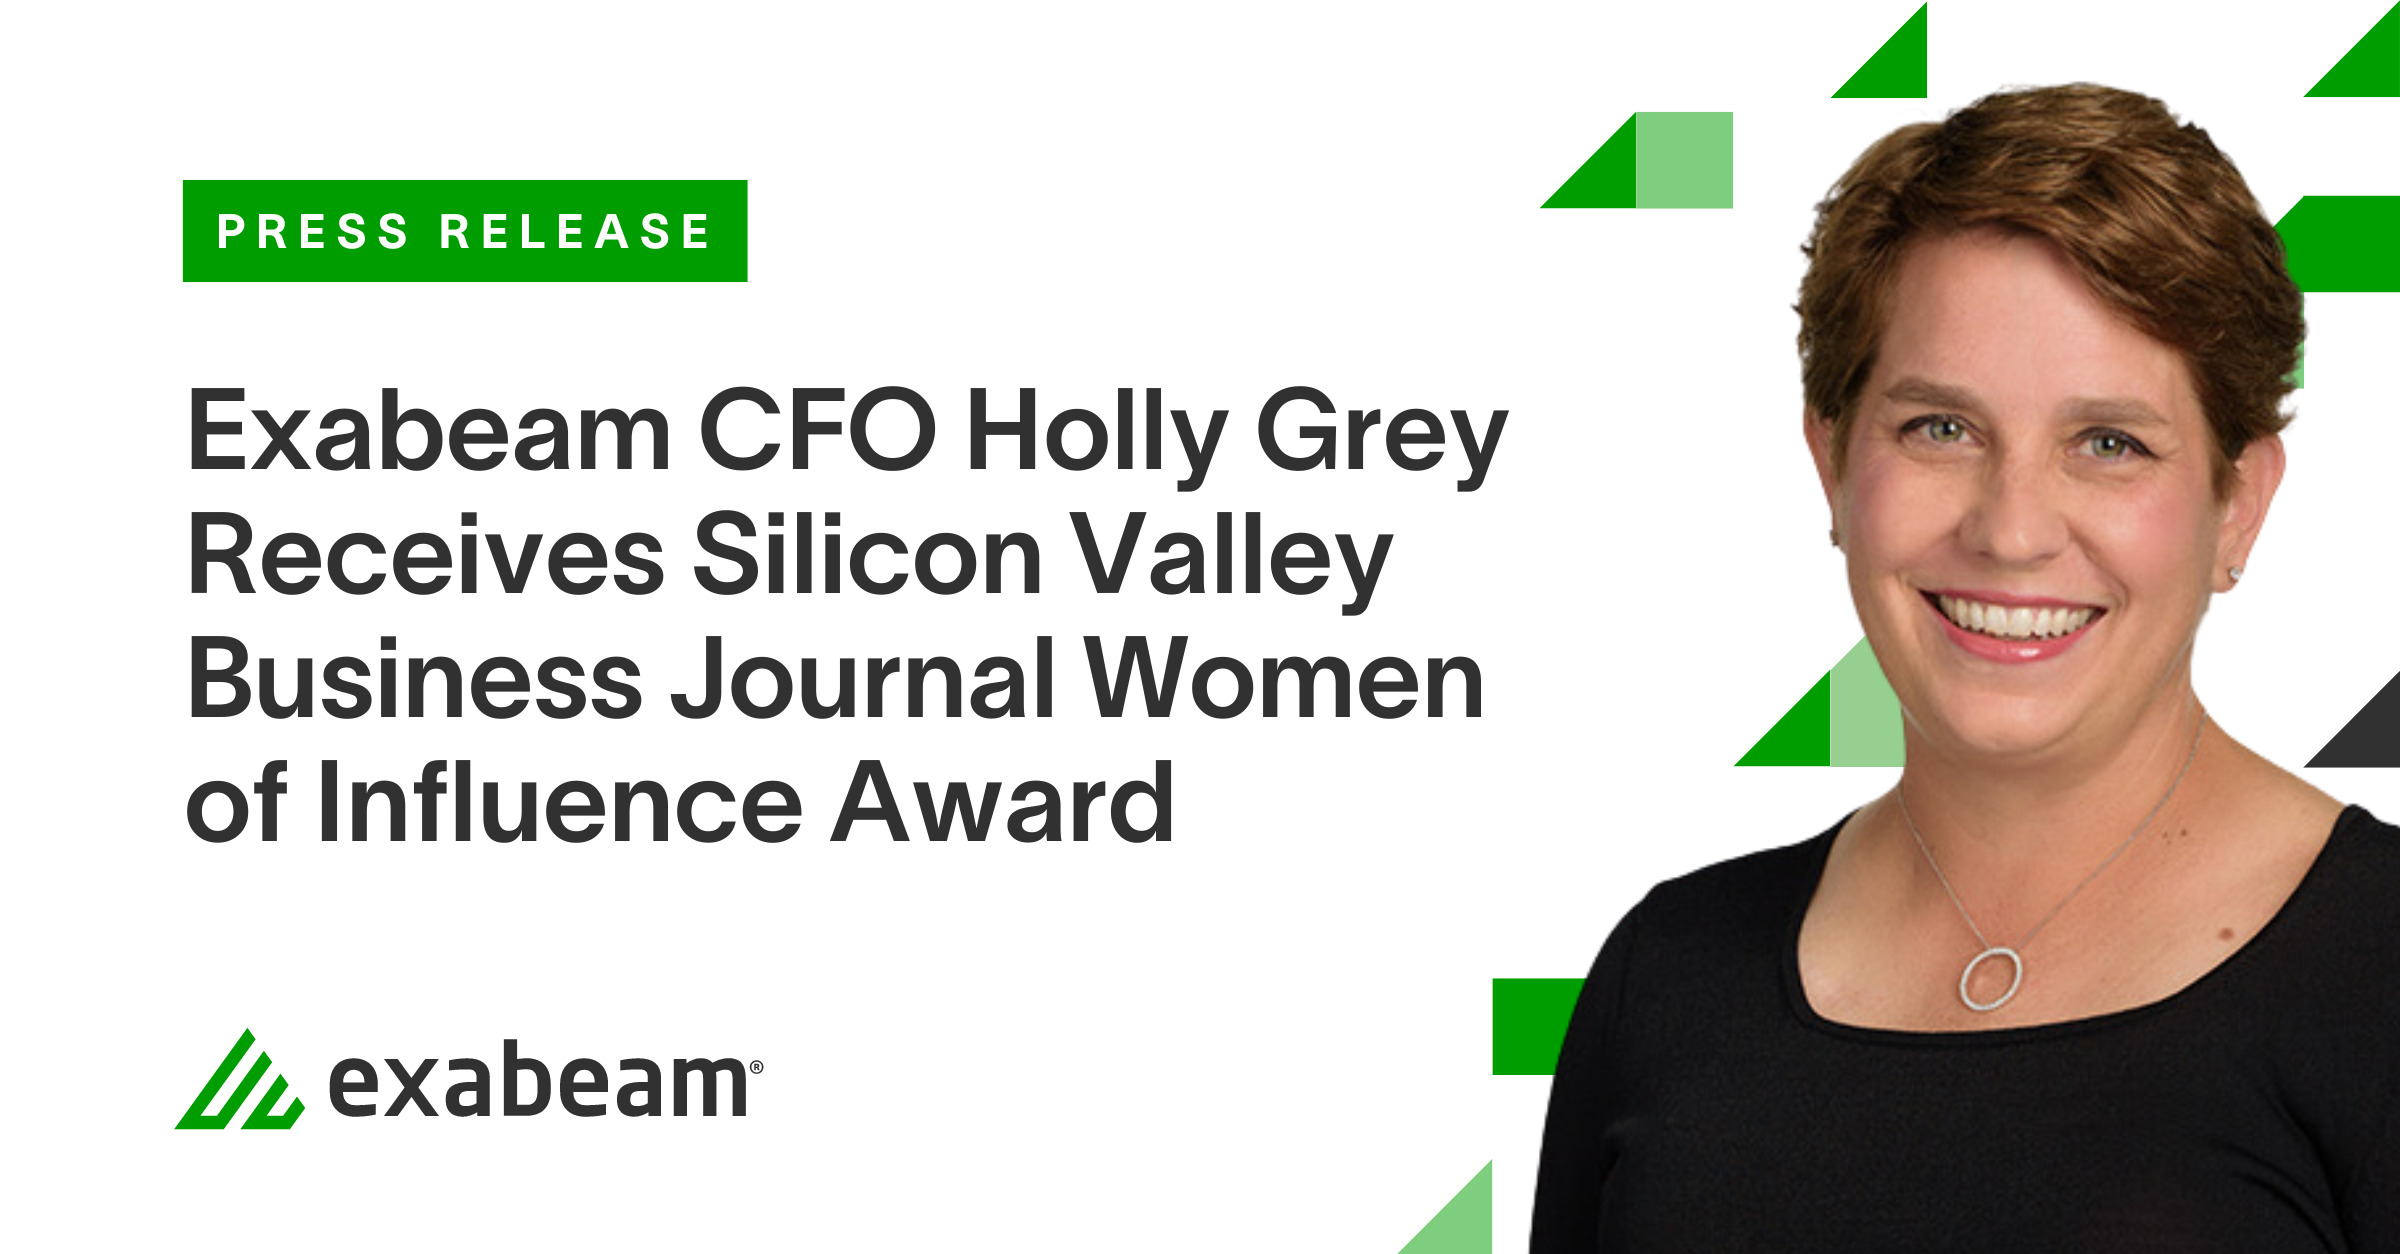 Exabeam CFO Holly Grey Receives Silicon Valley Business Journal Women of Influence Award